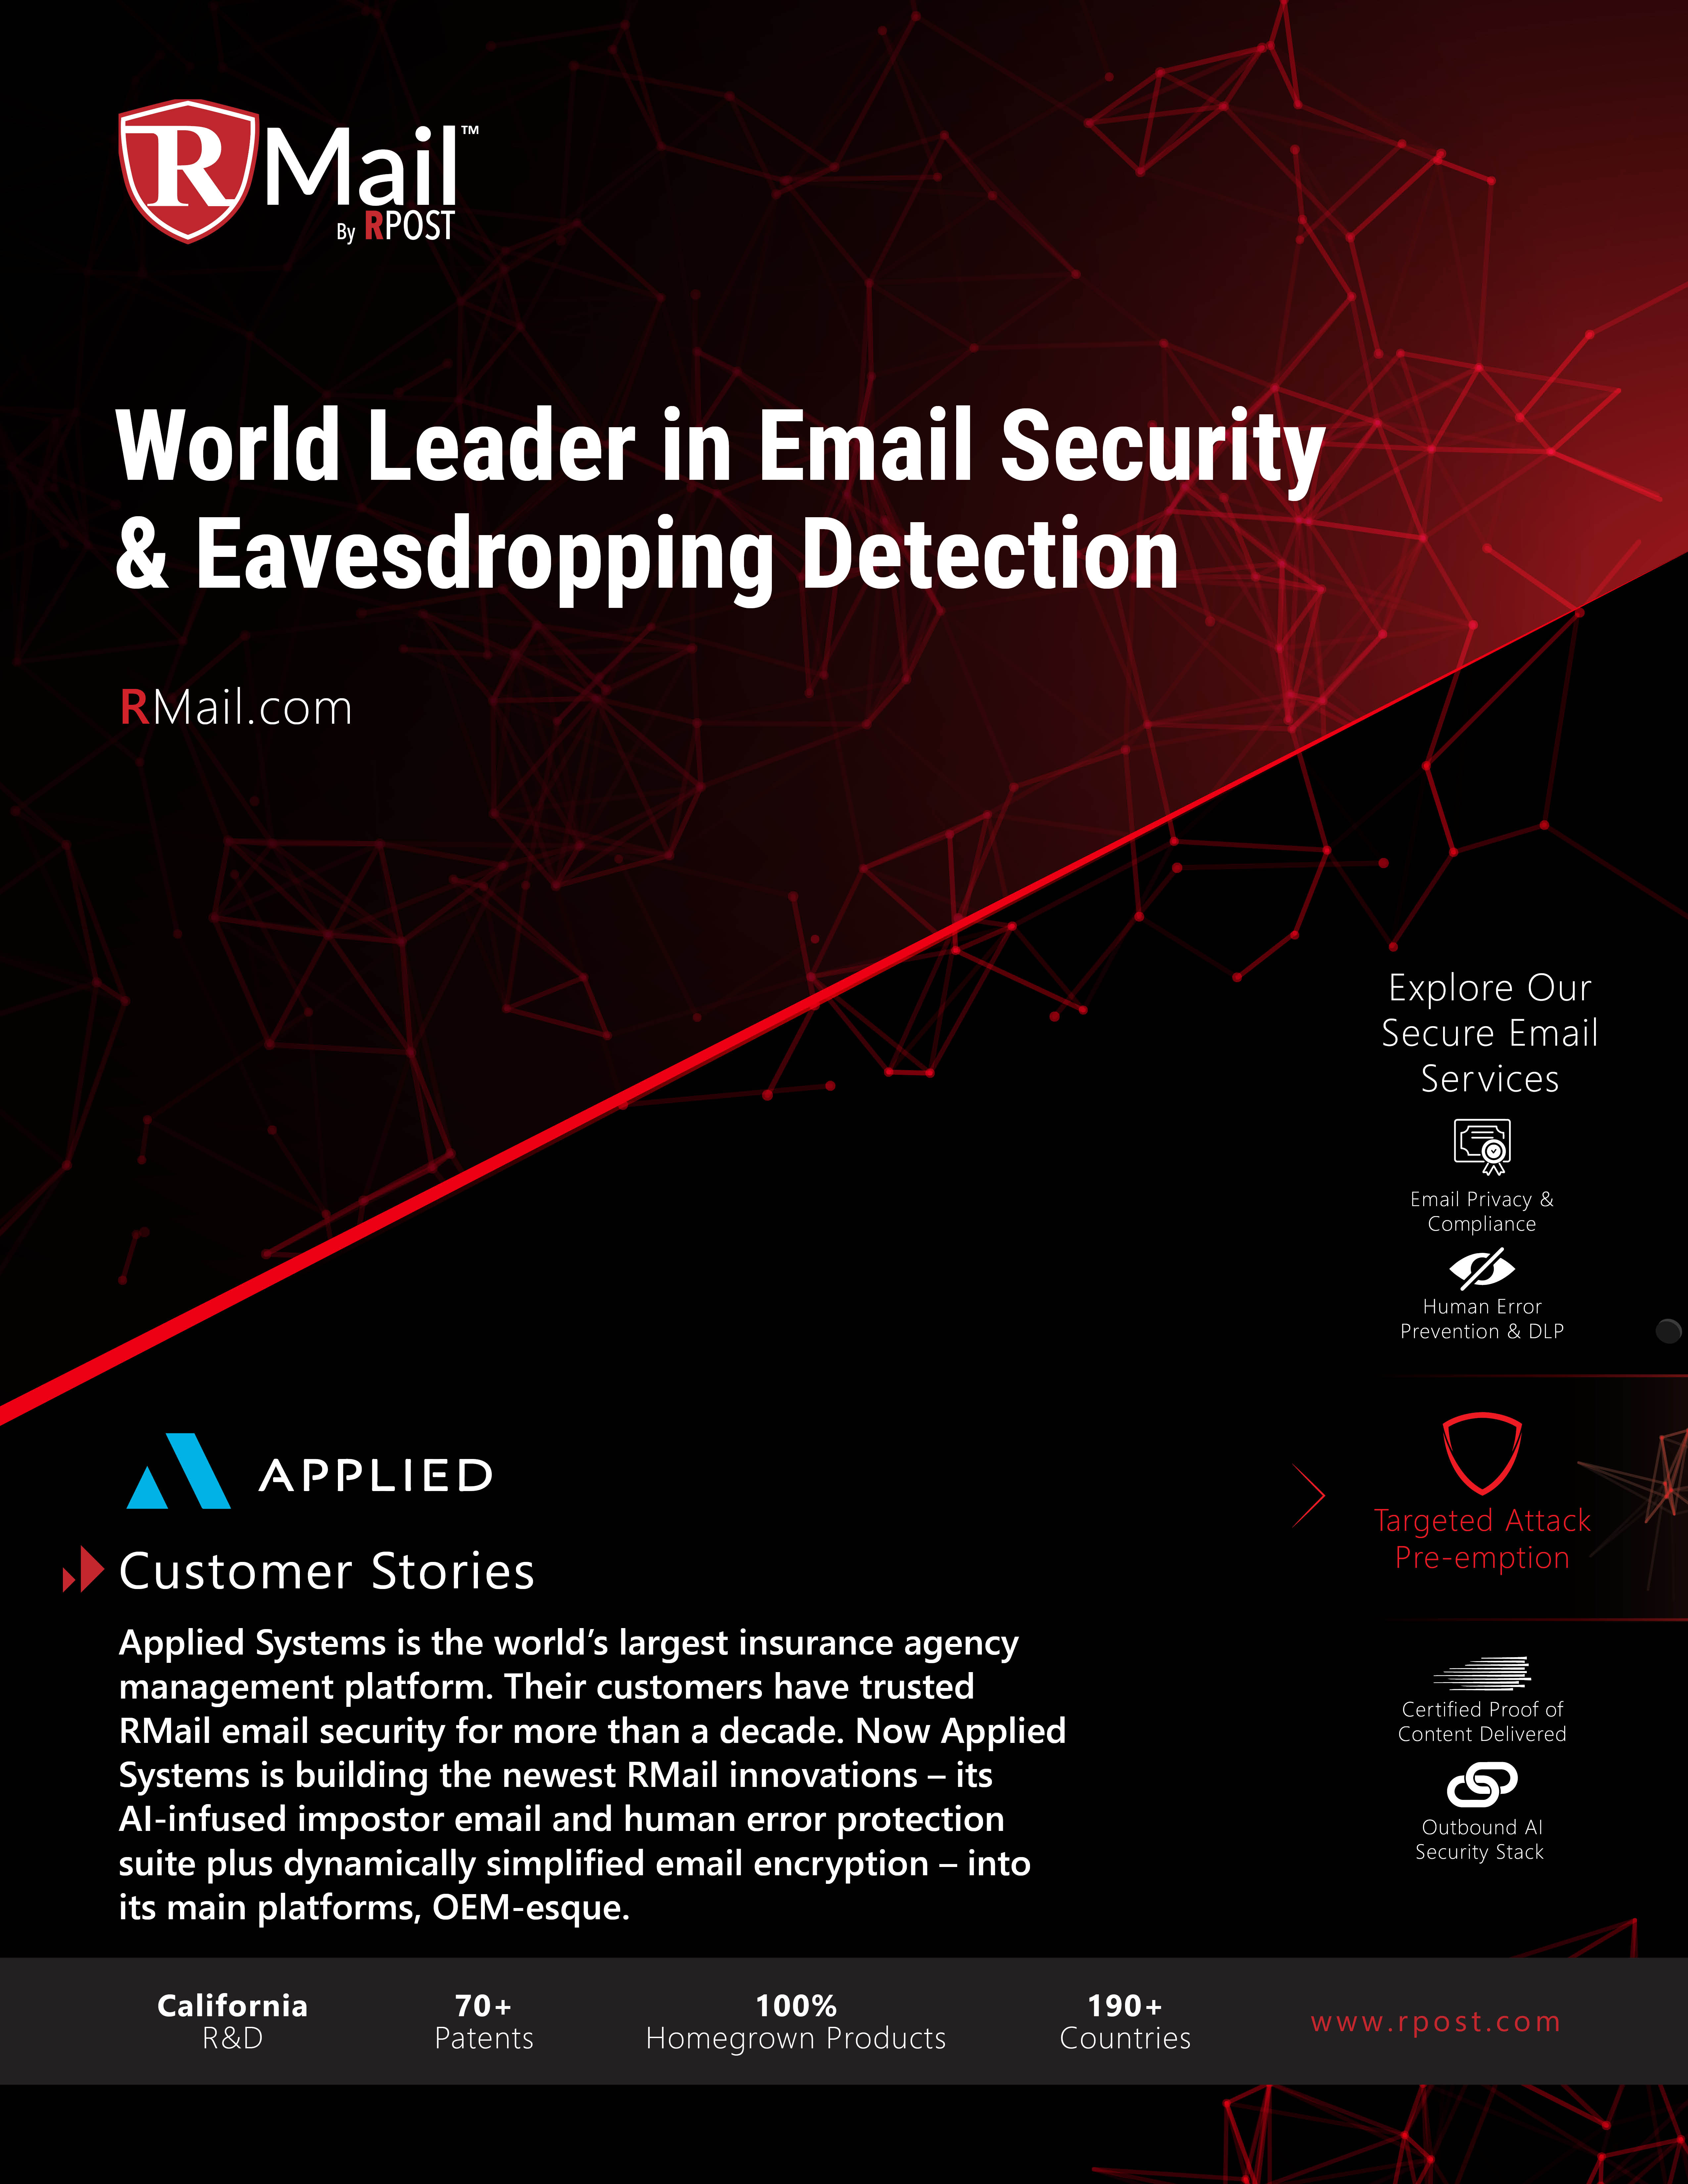 This brochure focuses on unfolding the anatomy of sophisticated cybercrimes and RMail’s PRE-Crime™ module designed to prevent, detect, and disarm such attacks